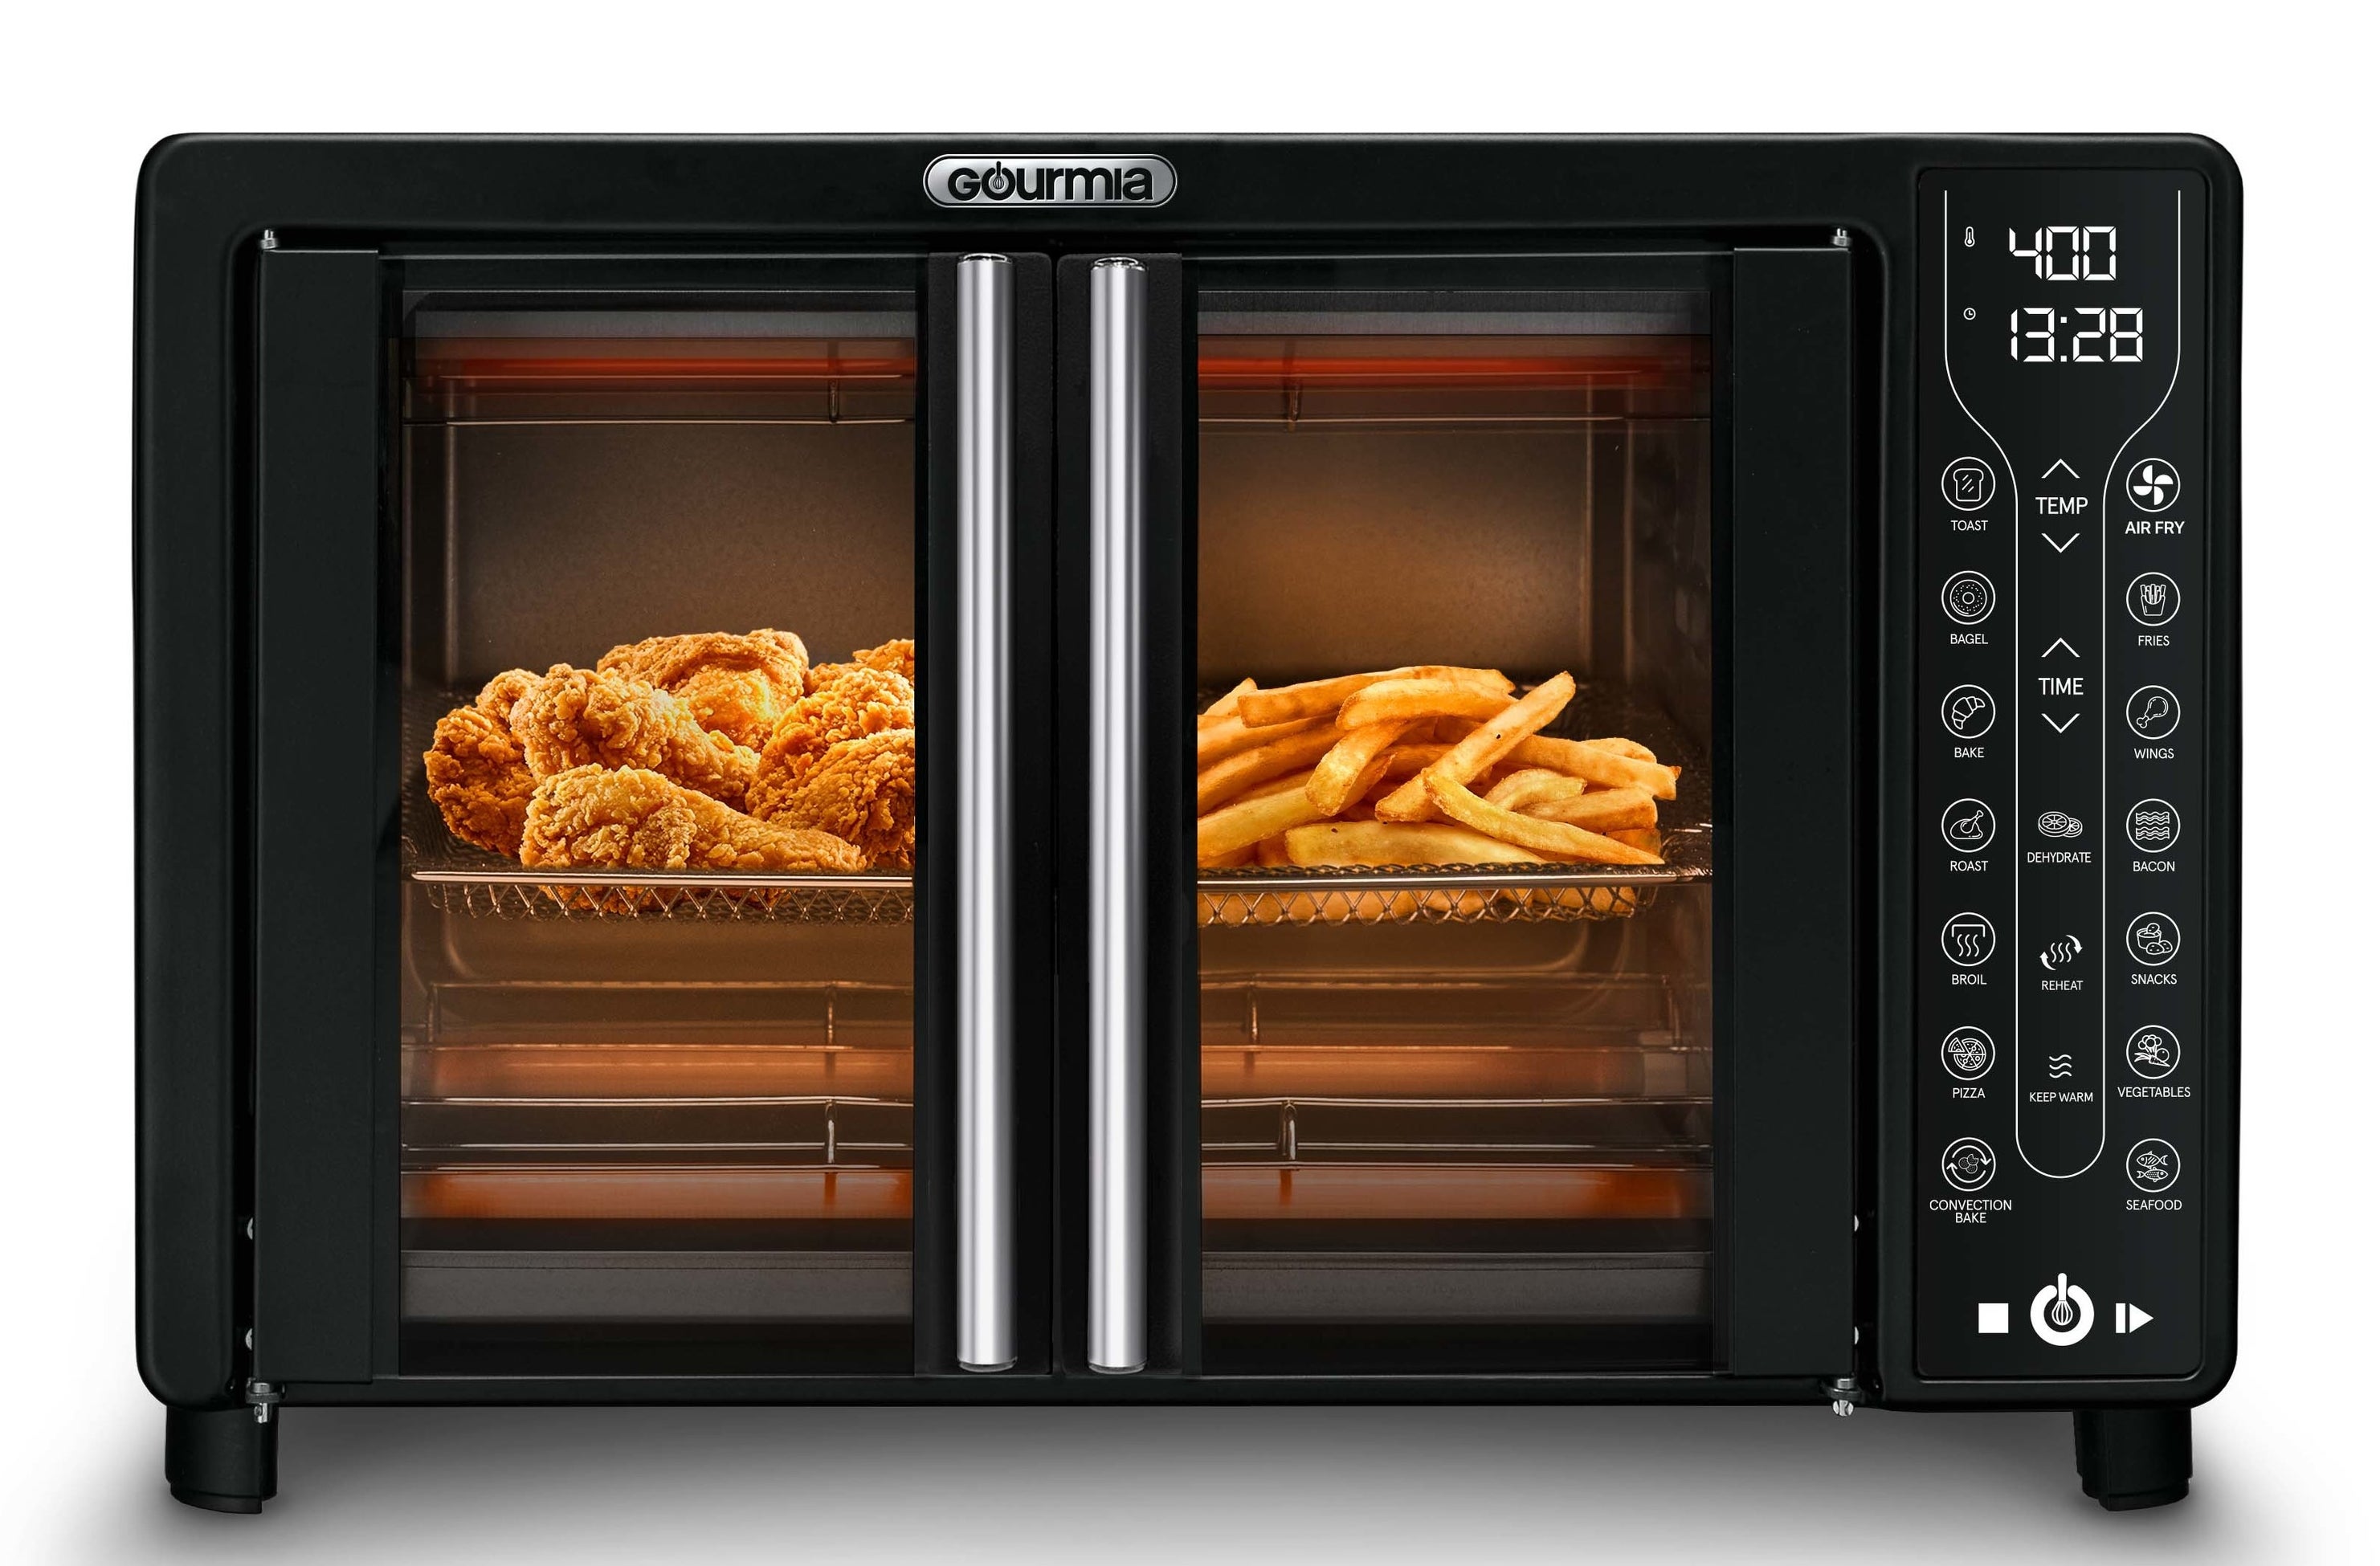 The oven, which has glass panel French doors so you can watch your food cook